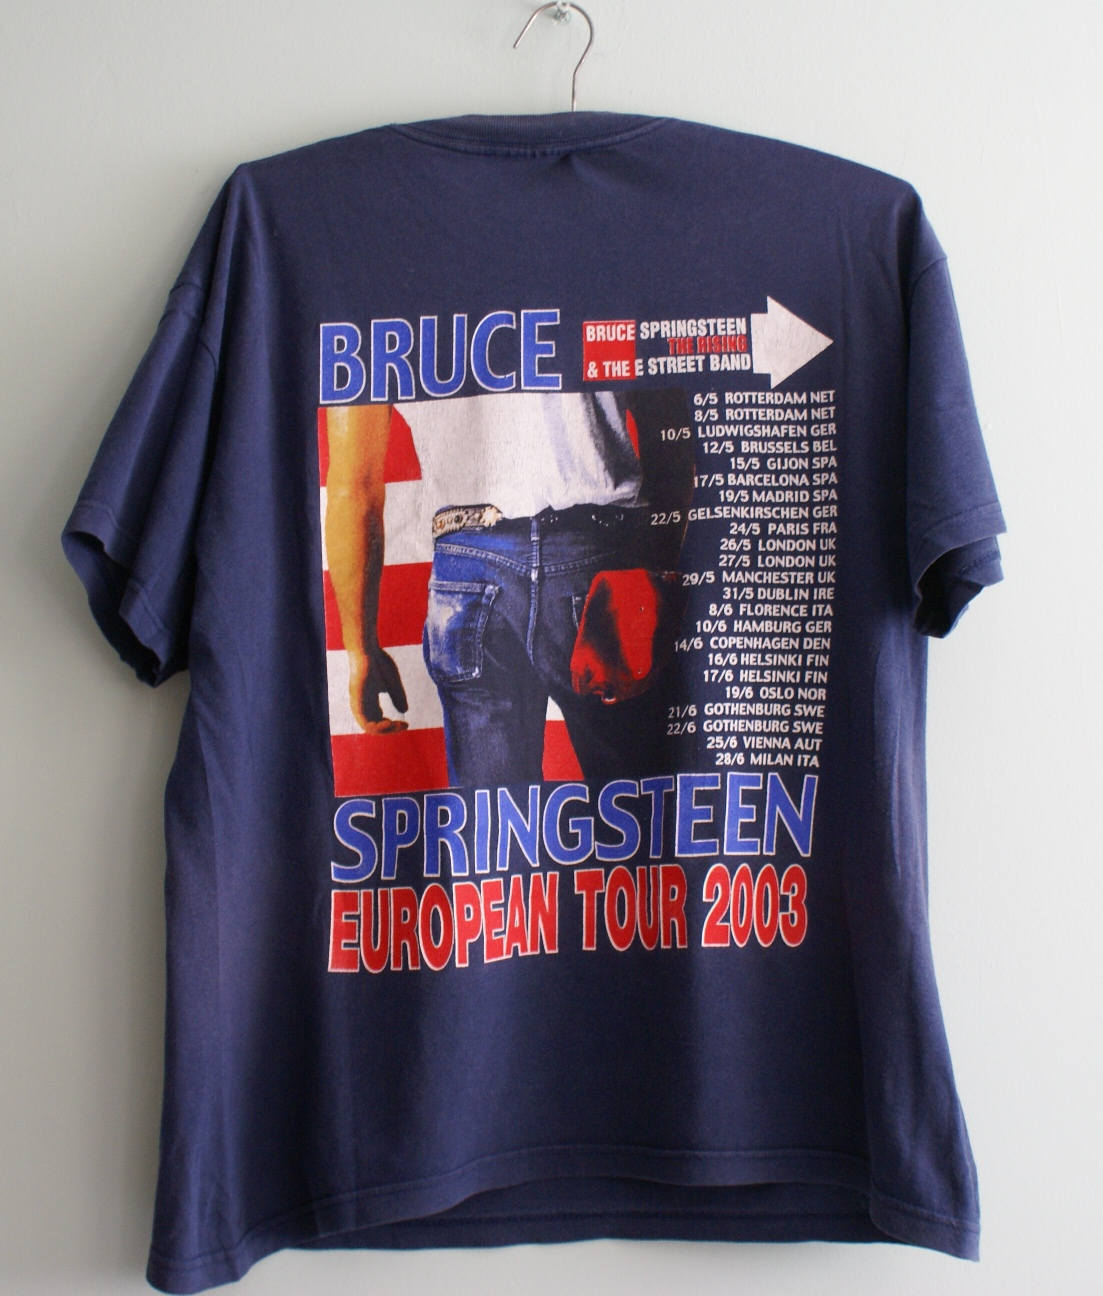 Primary image for Springsteen European Tour T-shirt, Extremely Rare Blue Bruce Springsteen Concert